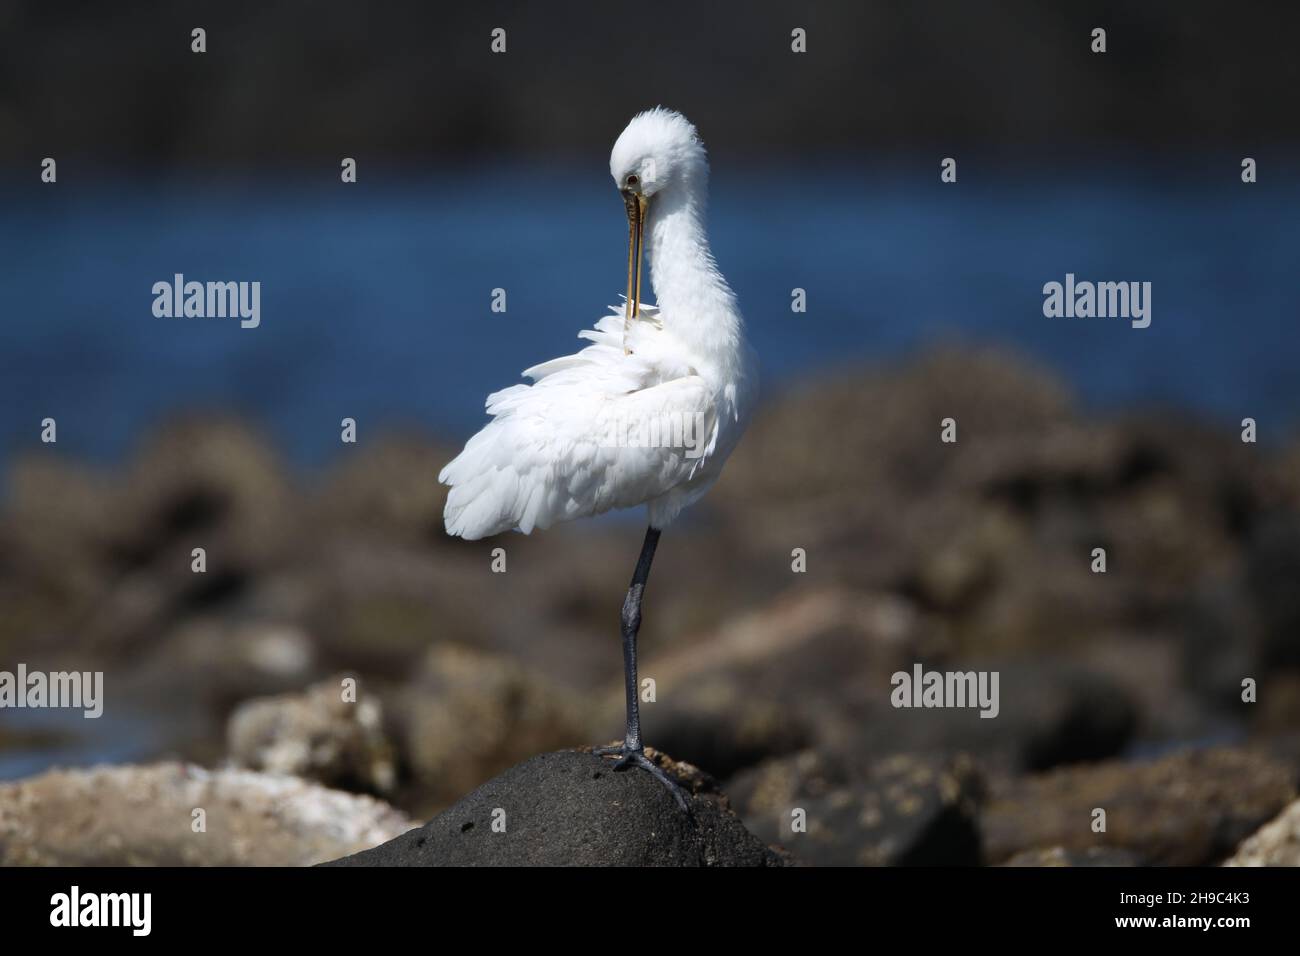 There are a number of spoonbill on Lanzarote where they Winter and migrate through other seasons.  A large white aquatic bird with spoon shaped bill. Stock Photo